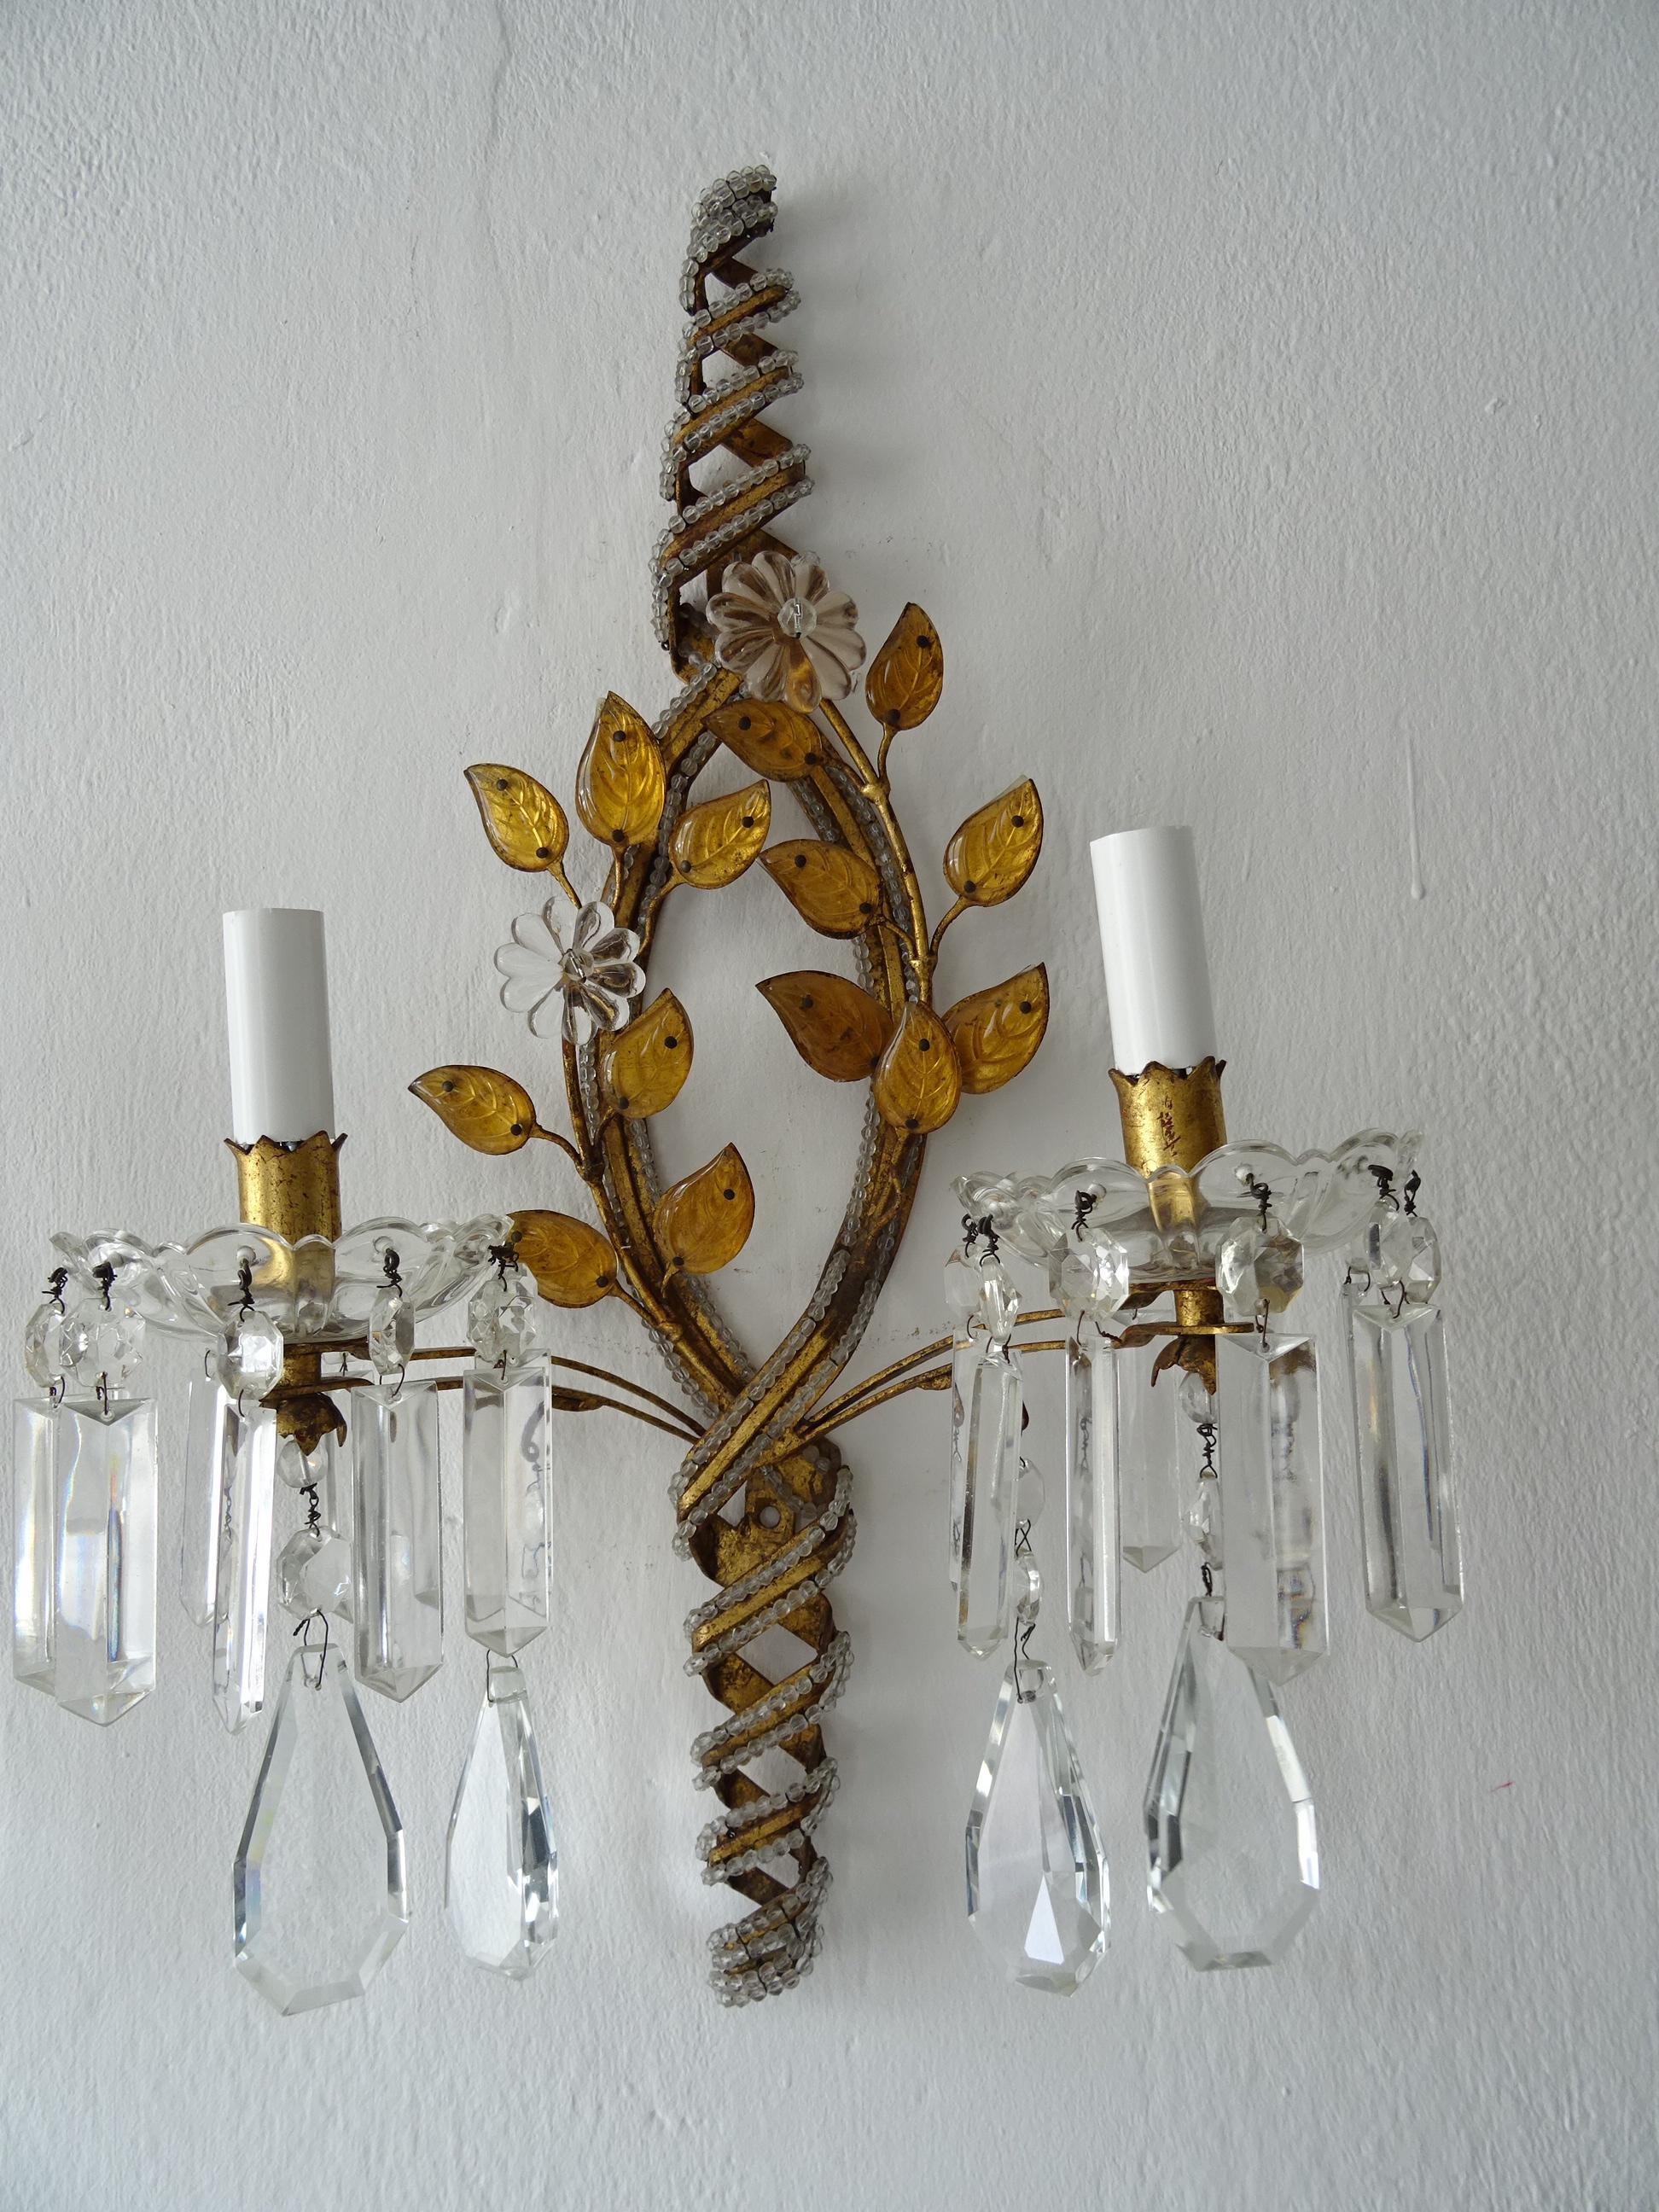 Mid-20th Century French Maison Baguès Crystal Prisms Leaves Beaded Sconces Signed For Sale